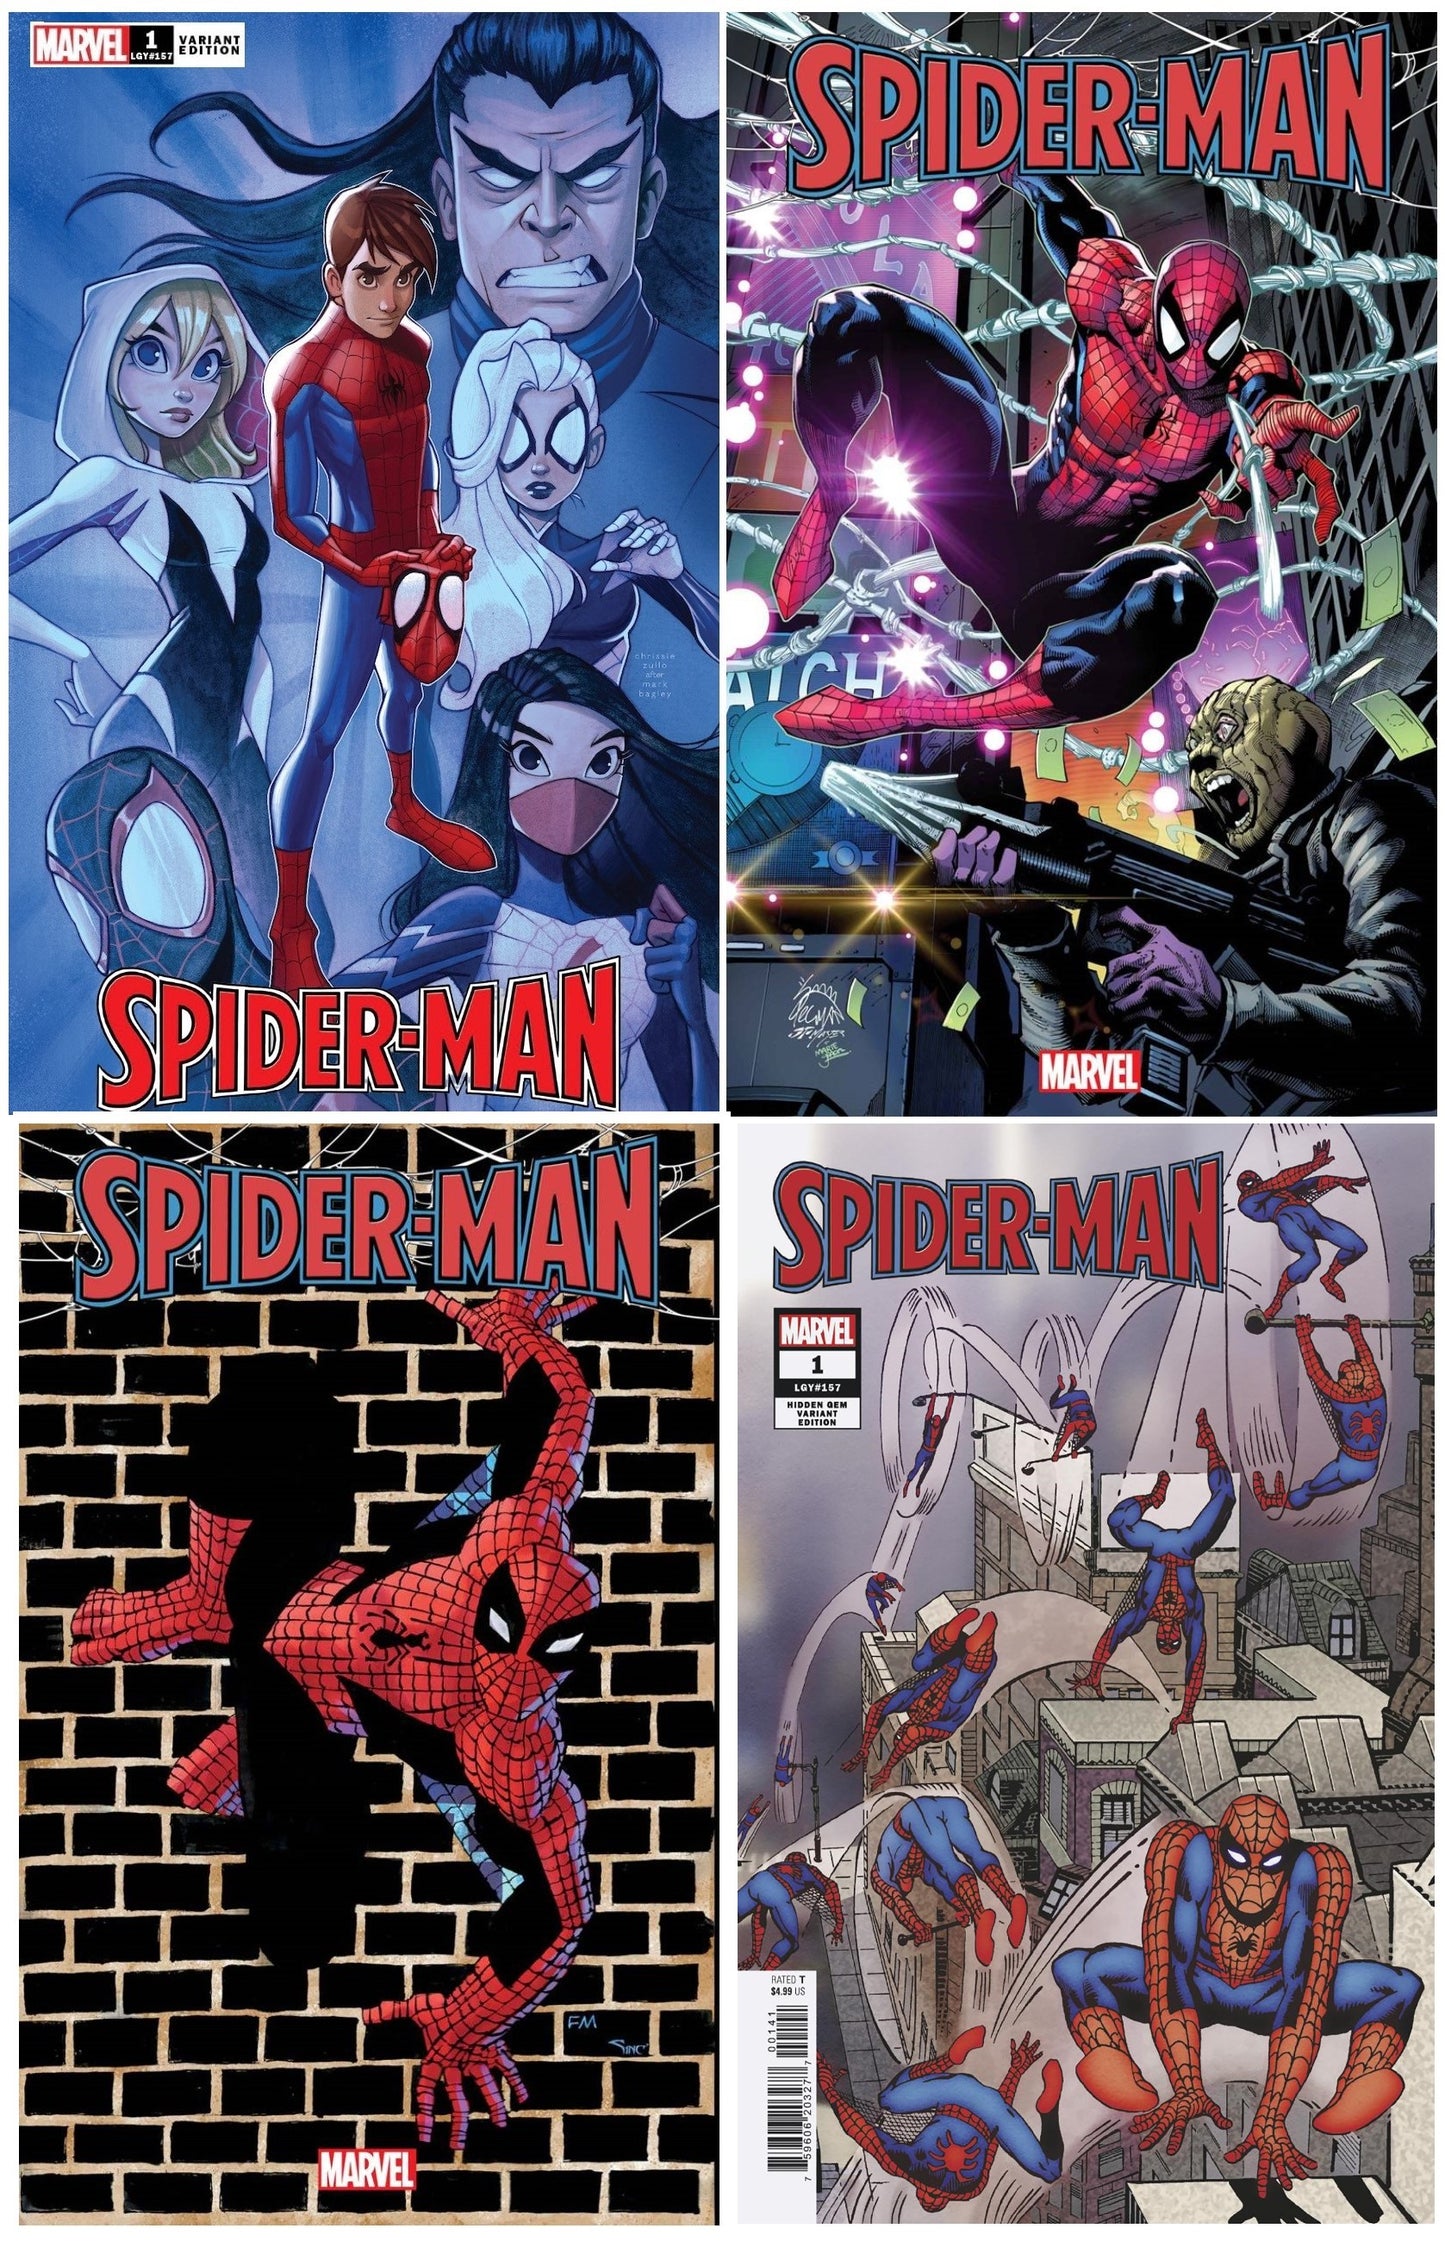 SPIDER-MAN #1 CHRISSIE ZULLO VARIANT LIMITED TO 600 COPIES WITH NUMBERED COA + 1:25, 1:50 & 1:100 VARIANT